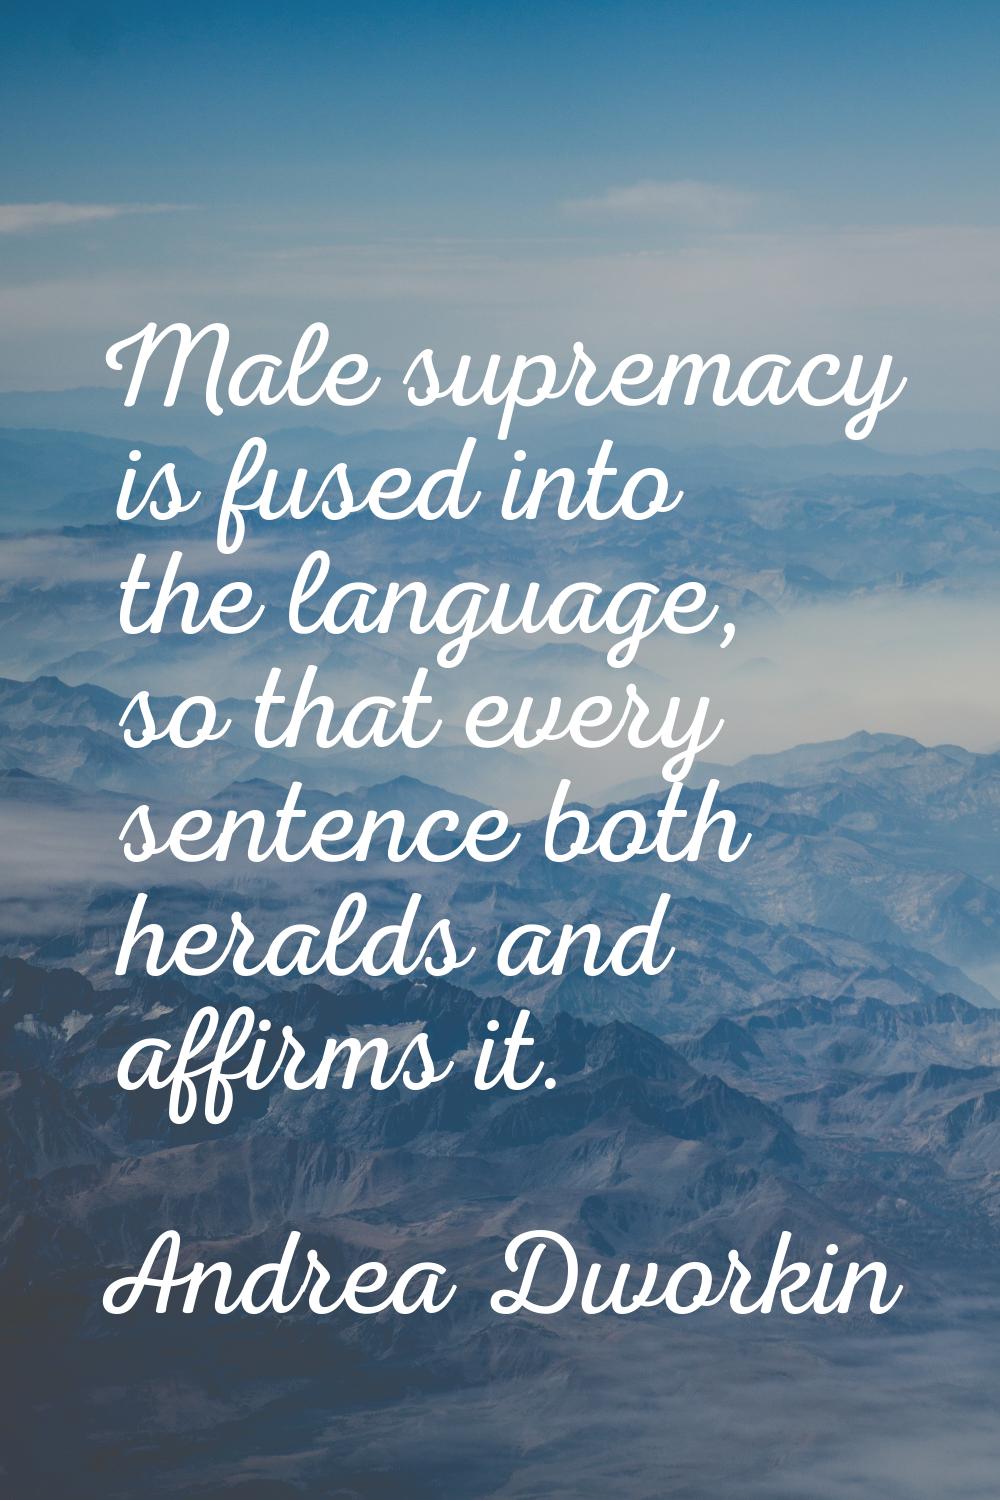 Male supremacy is fused into the language, so that every sentence both heralds and affirms it.